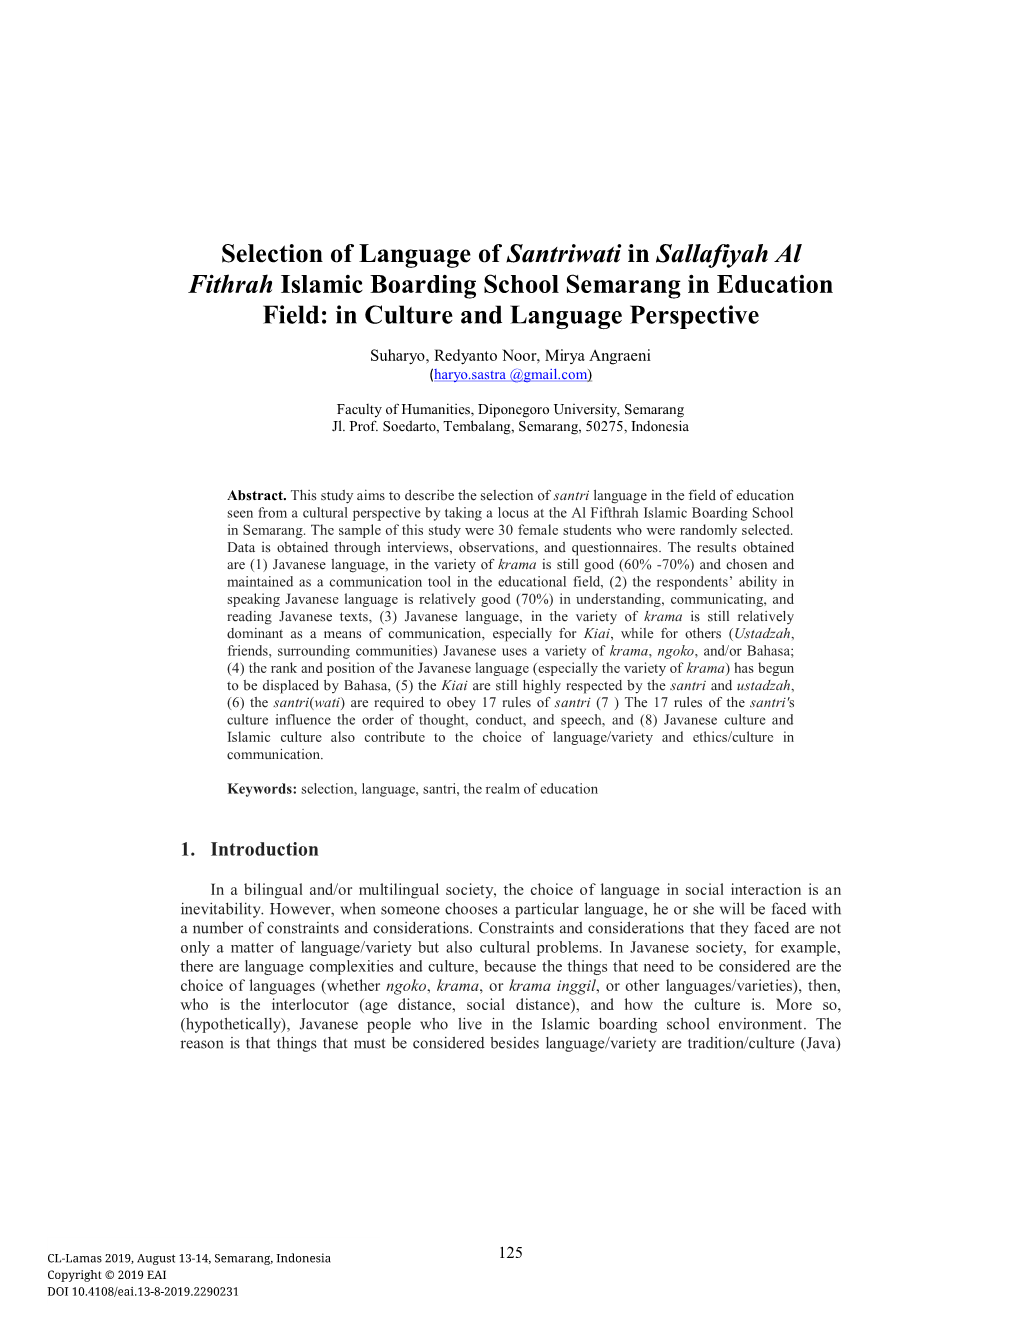 Selection of Language of Santriwati in Sallafiyah Al Fithrah Islamic Boarding School Semarang in Education Field: in Culture and Language Perspective